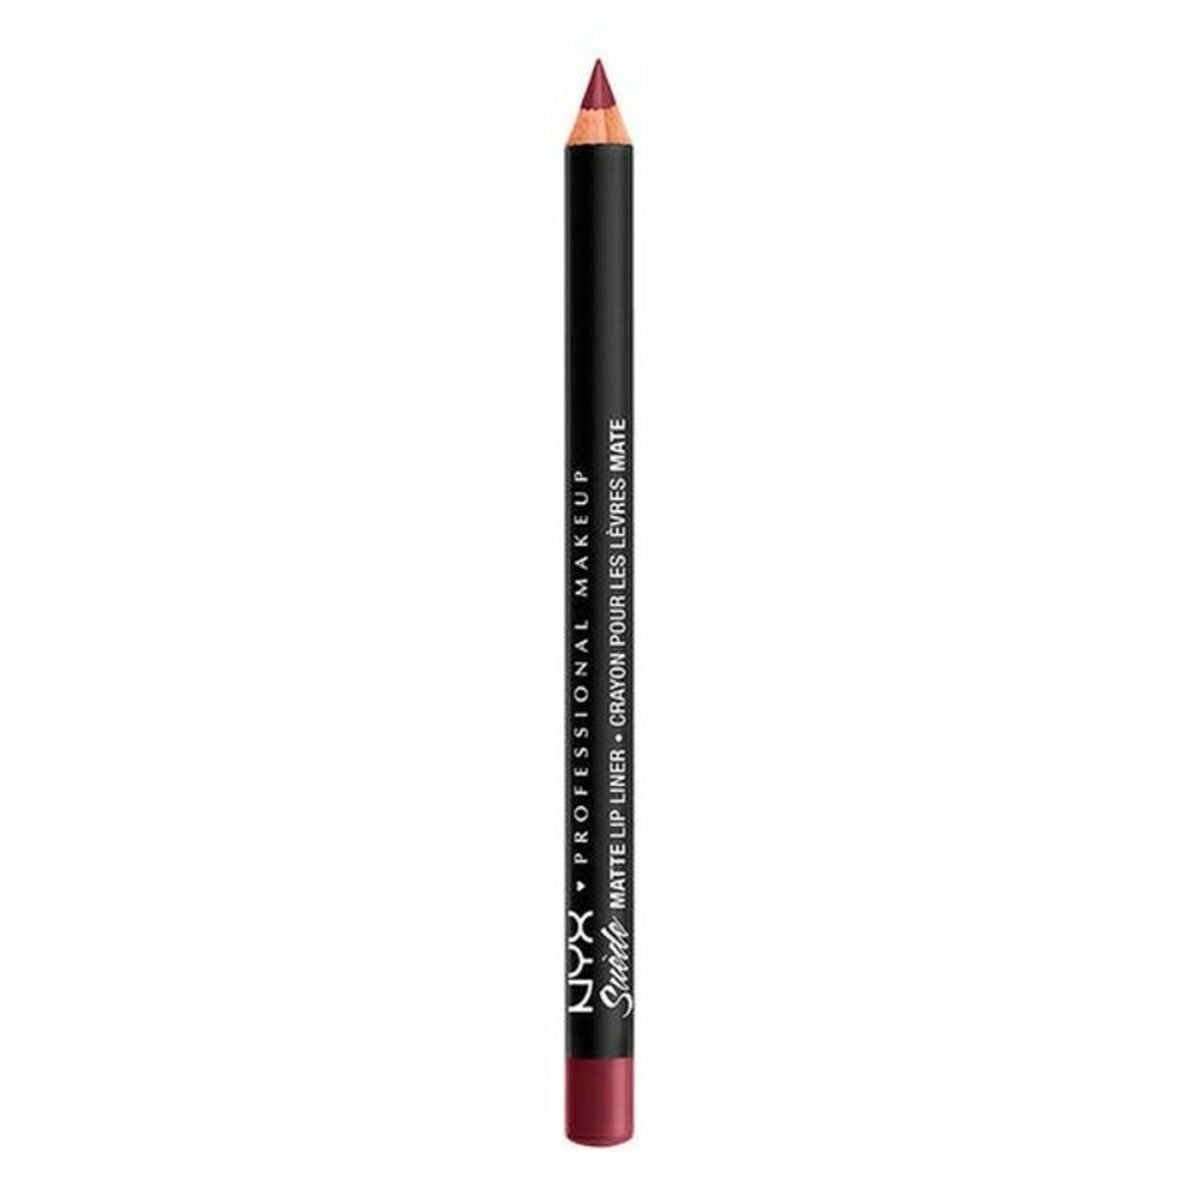 Lippenliner Suede NYX (3,5 g) 3,5 g